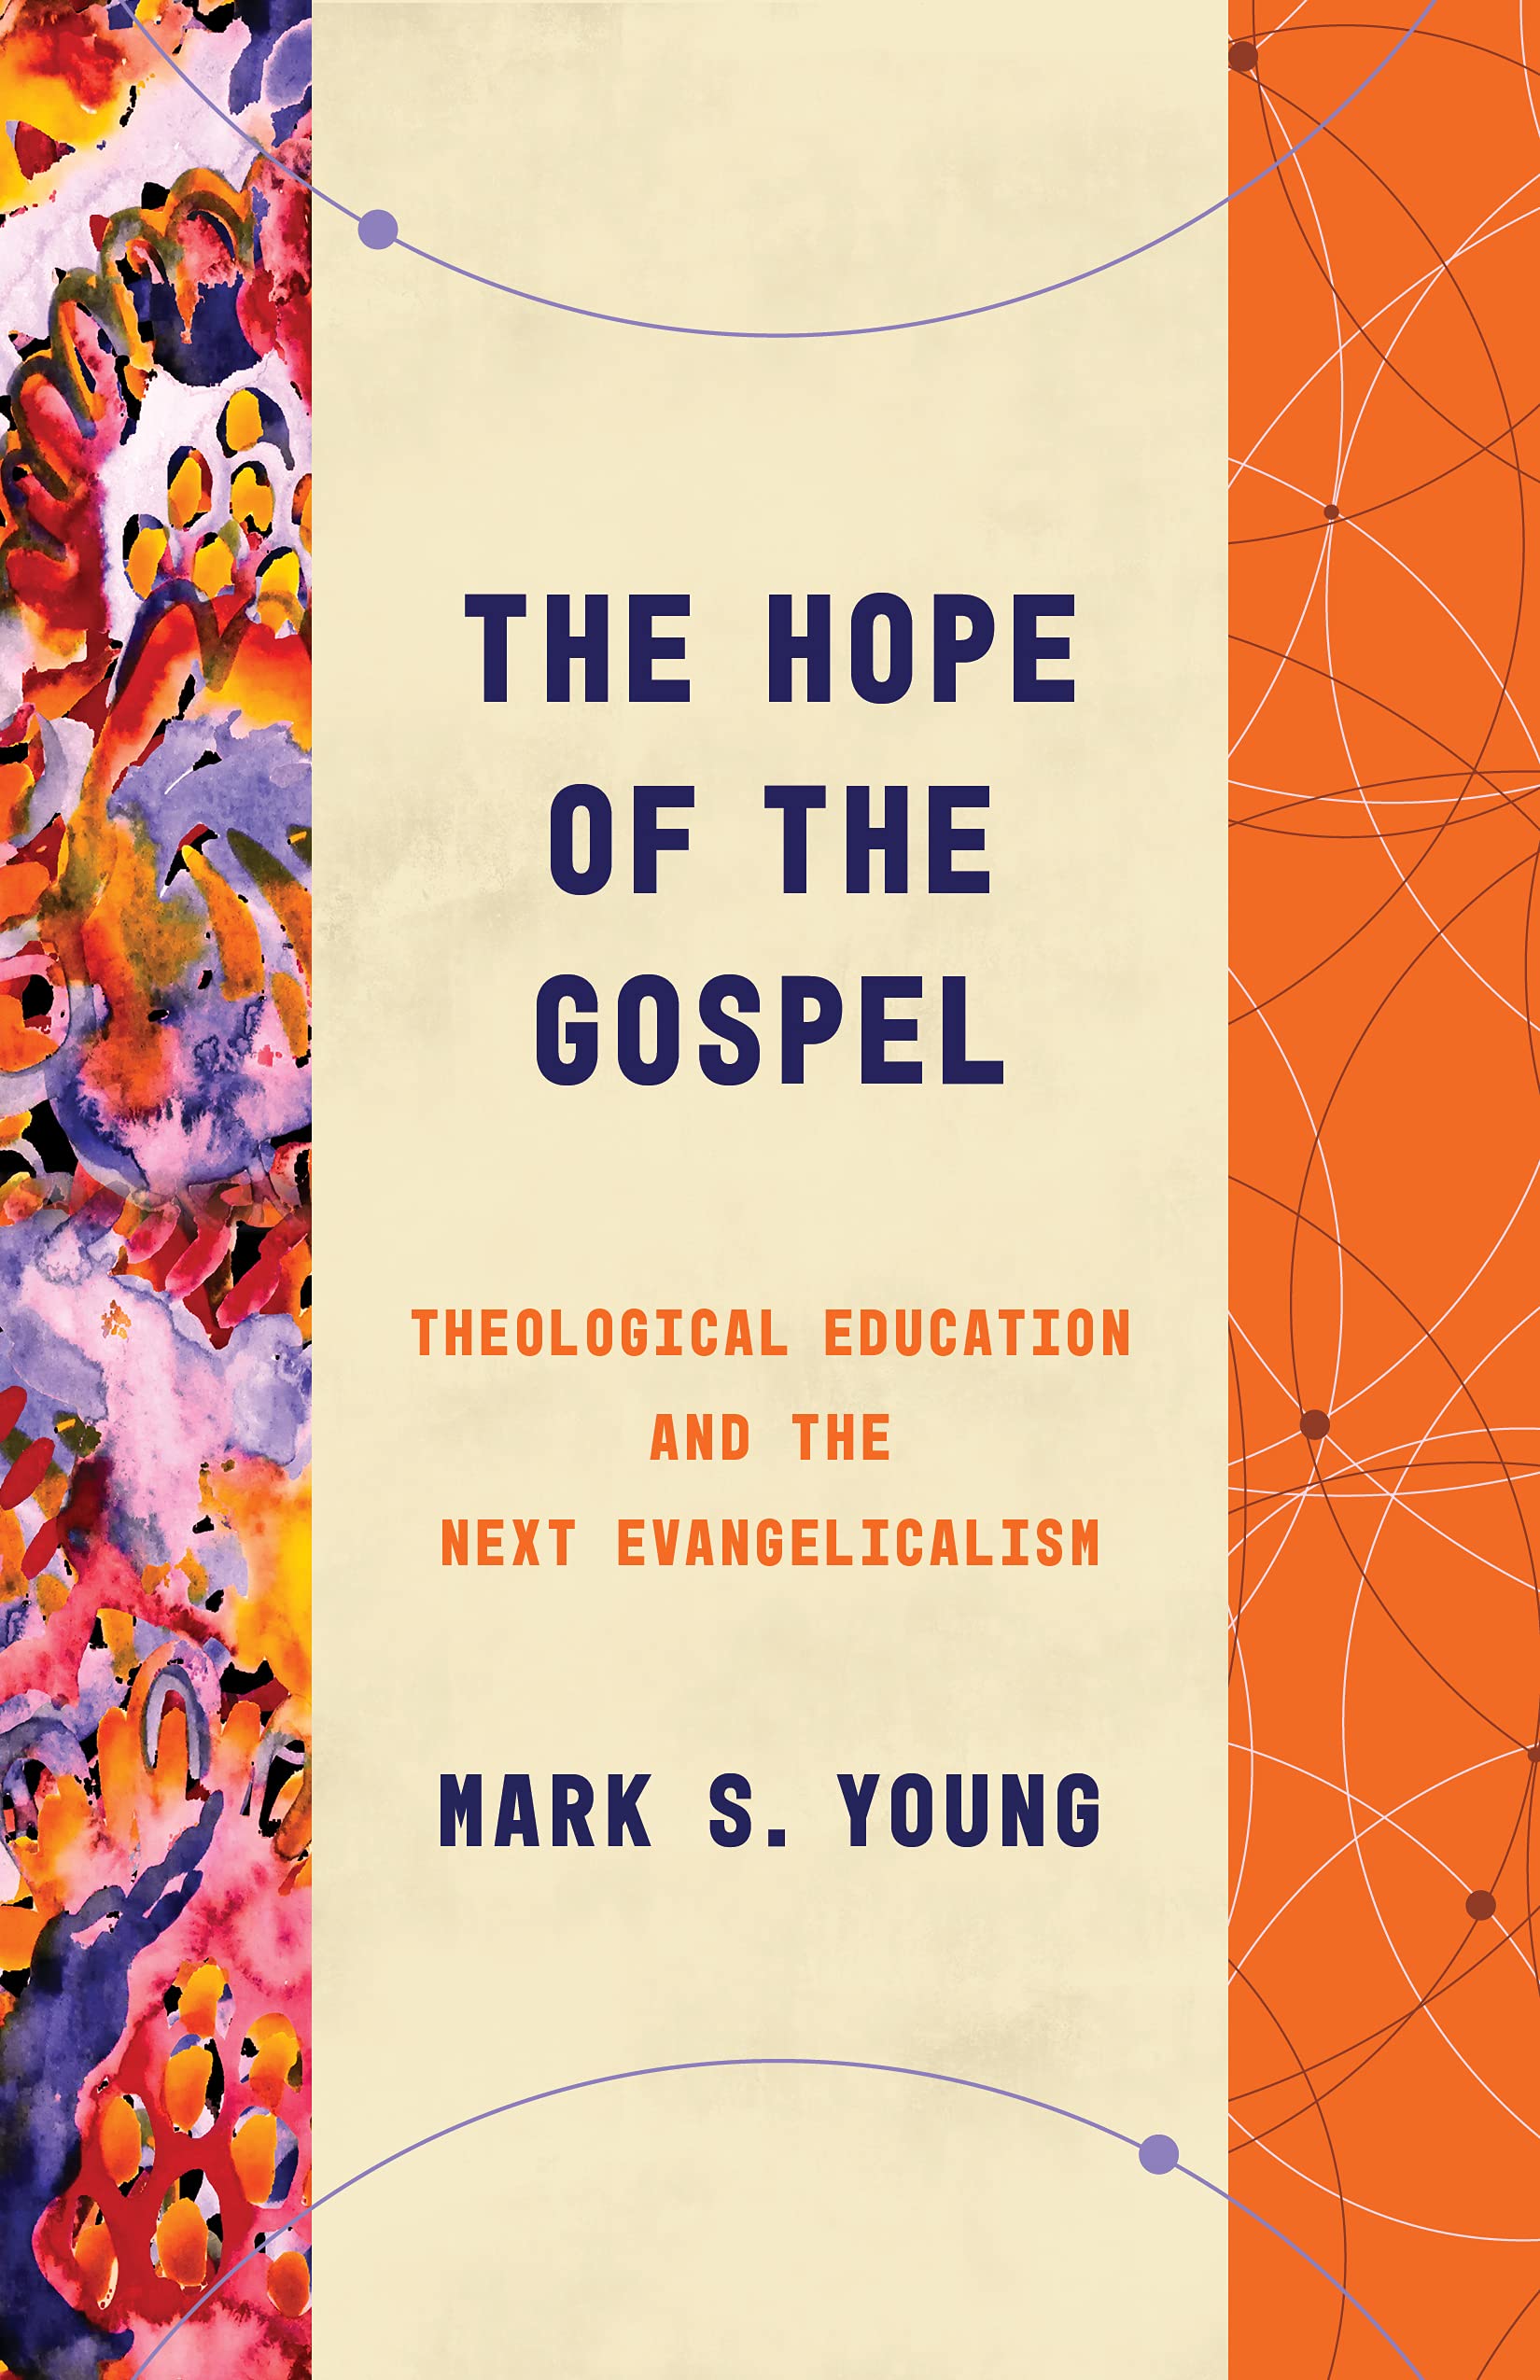 Theological Education is Changing!